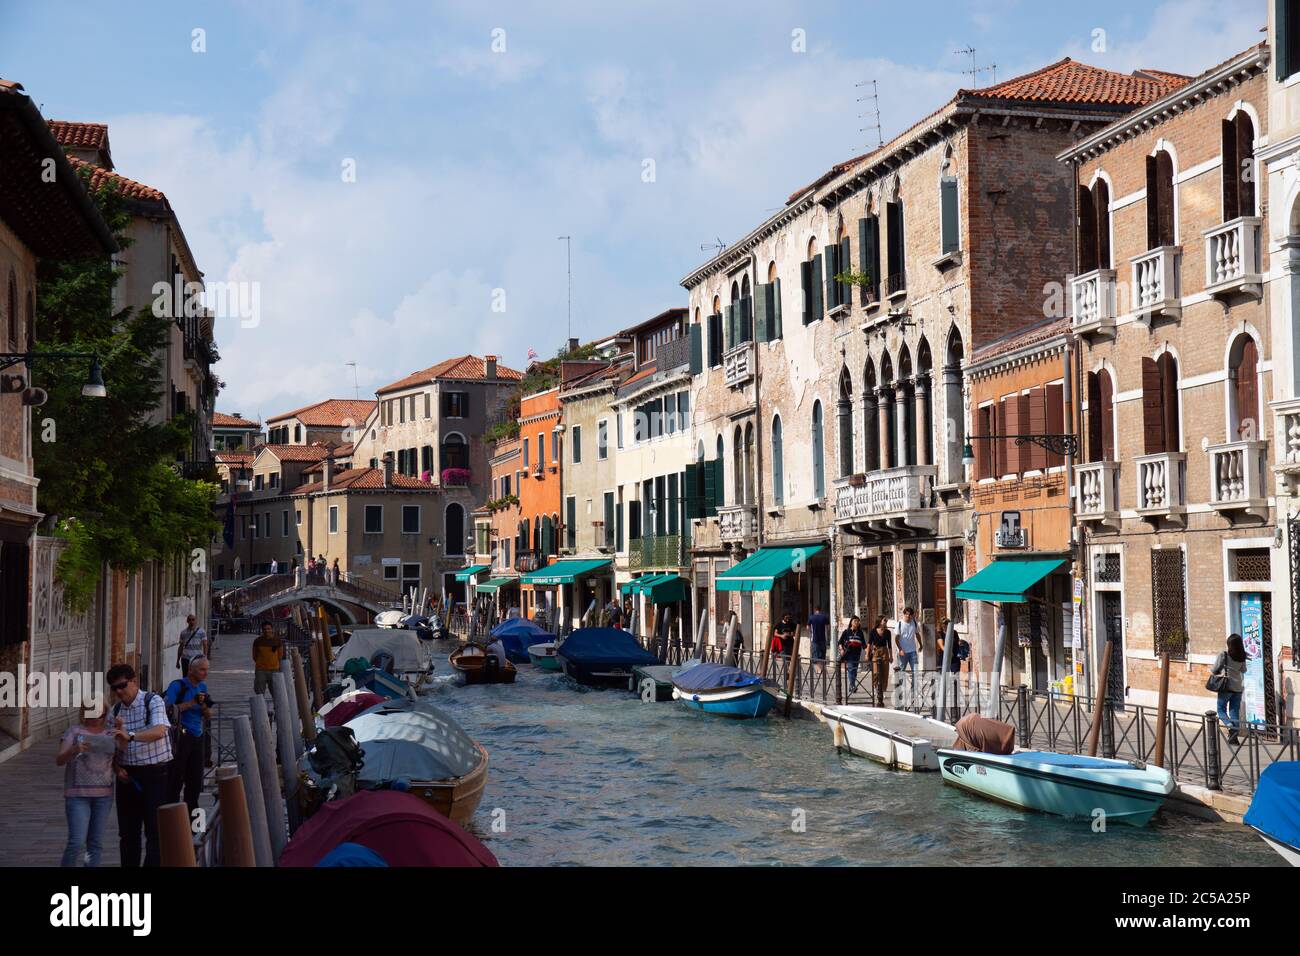 Oct. 1, 2019 - Venice, Italy: view to the streets of Venice, Italy. Busy streets with people and channels with boats. Venice is one of the busiest tou Stock Photo